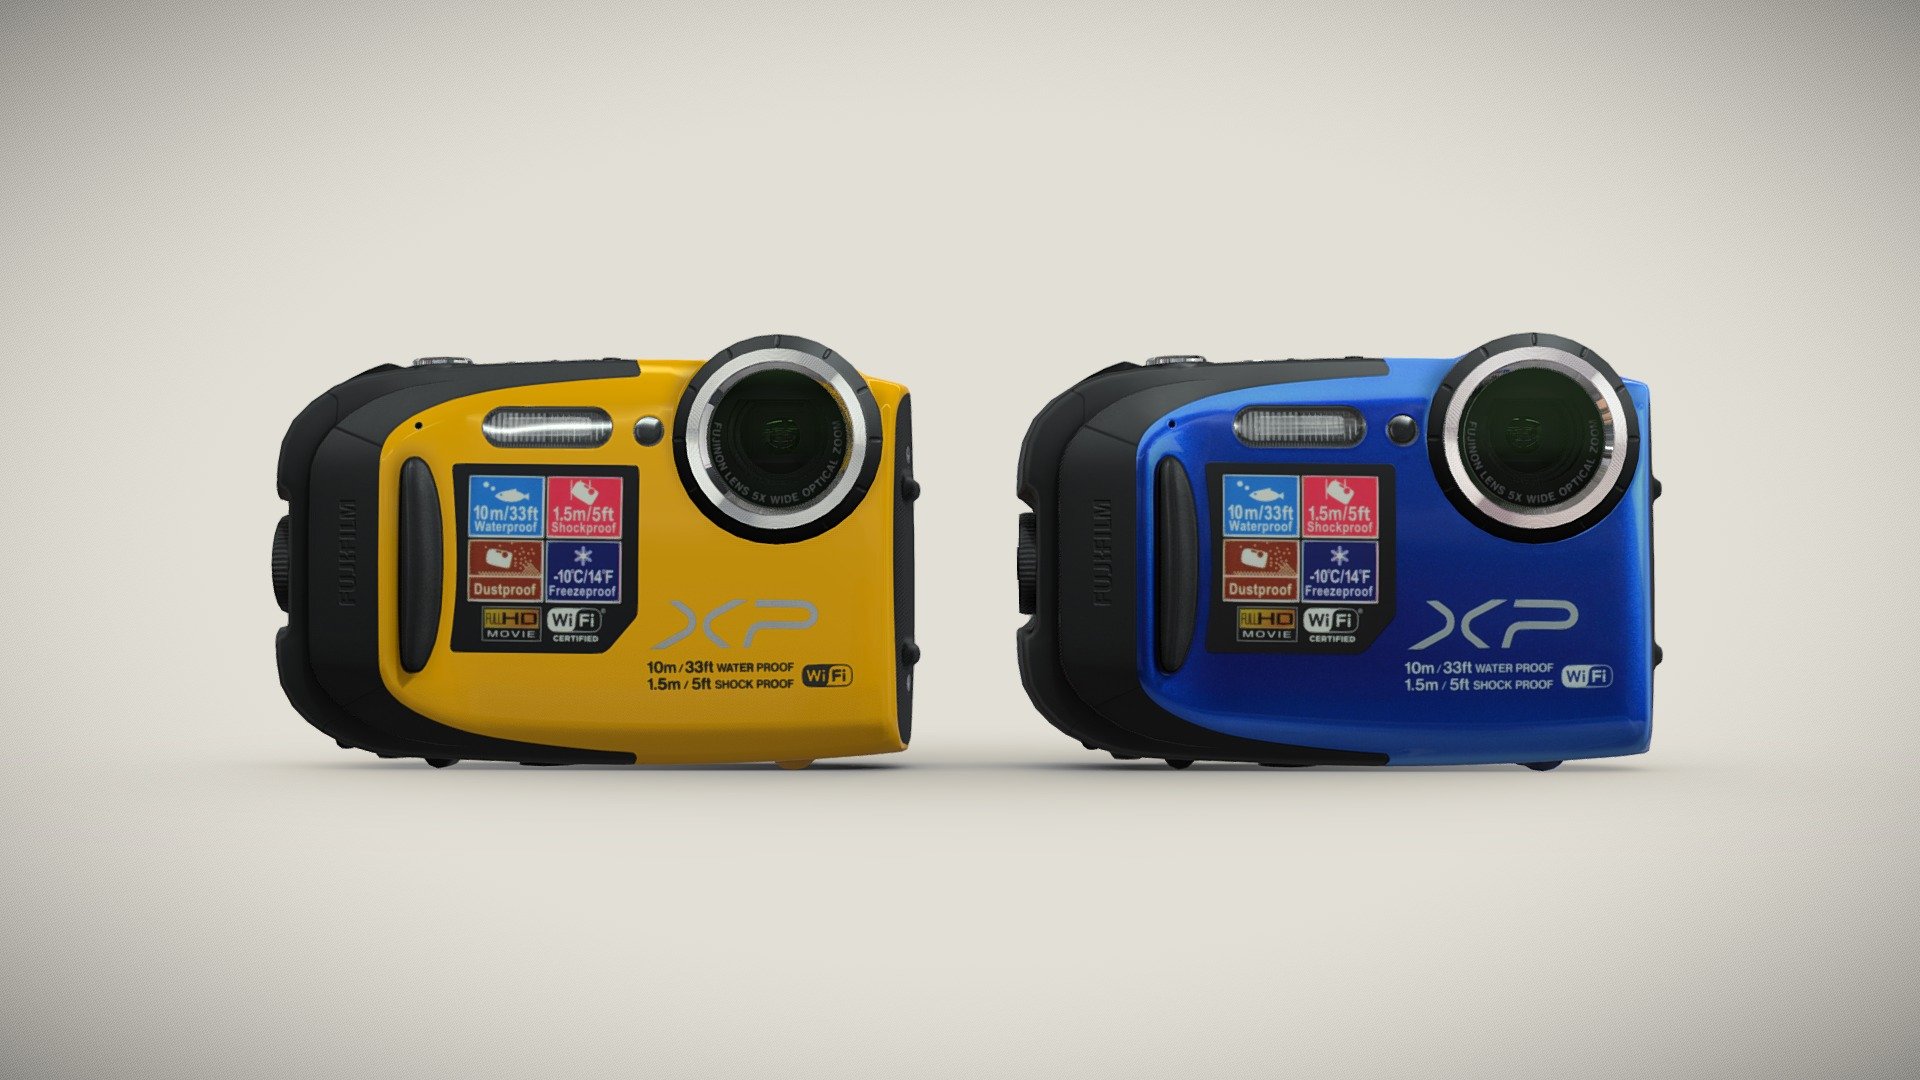 •   Let me present to you high-quality low-poly 3D model Fujifilm FinePix XP70. Model is presented in two colors: Blue and Yellow. Modeling was made with ortho-photos of real camera that is why all details of design are recreated most authentically.

•    This model consists of two meshes, it is low-polygonal and it has only two materials (Body and Glass of Lens).

•   The total of the main textures is 5. Resolution of all textures is 4096 pixels square aspect ratio in .png format. Also there is original texture file .PSD format in separate archive.

•   Polygon count of the model is – 4855.

•   The model has correct dimensions in real-world scale. All parts grouped and named correctly.

•   To use the model in other 3D programs there are scenes saved in formats .fbx, .obj, .DAE, .max (2010 version).

Note: If you see some artifacts on the textures, it means compression works in the Viewer. We recommend setting HD quality for textures. But anyway, original textures have no artifacts 3d model